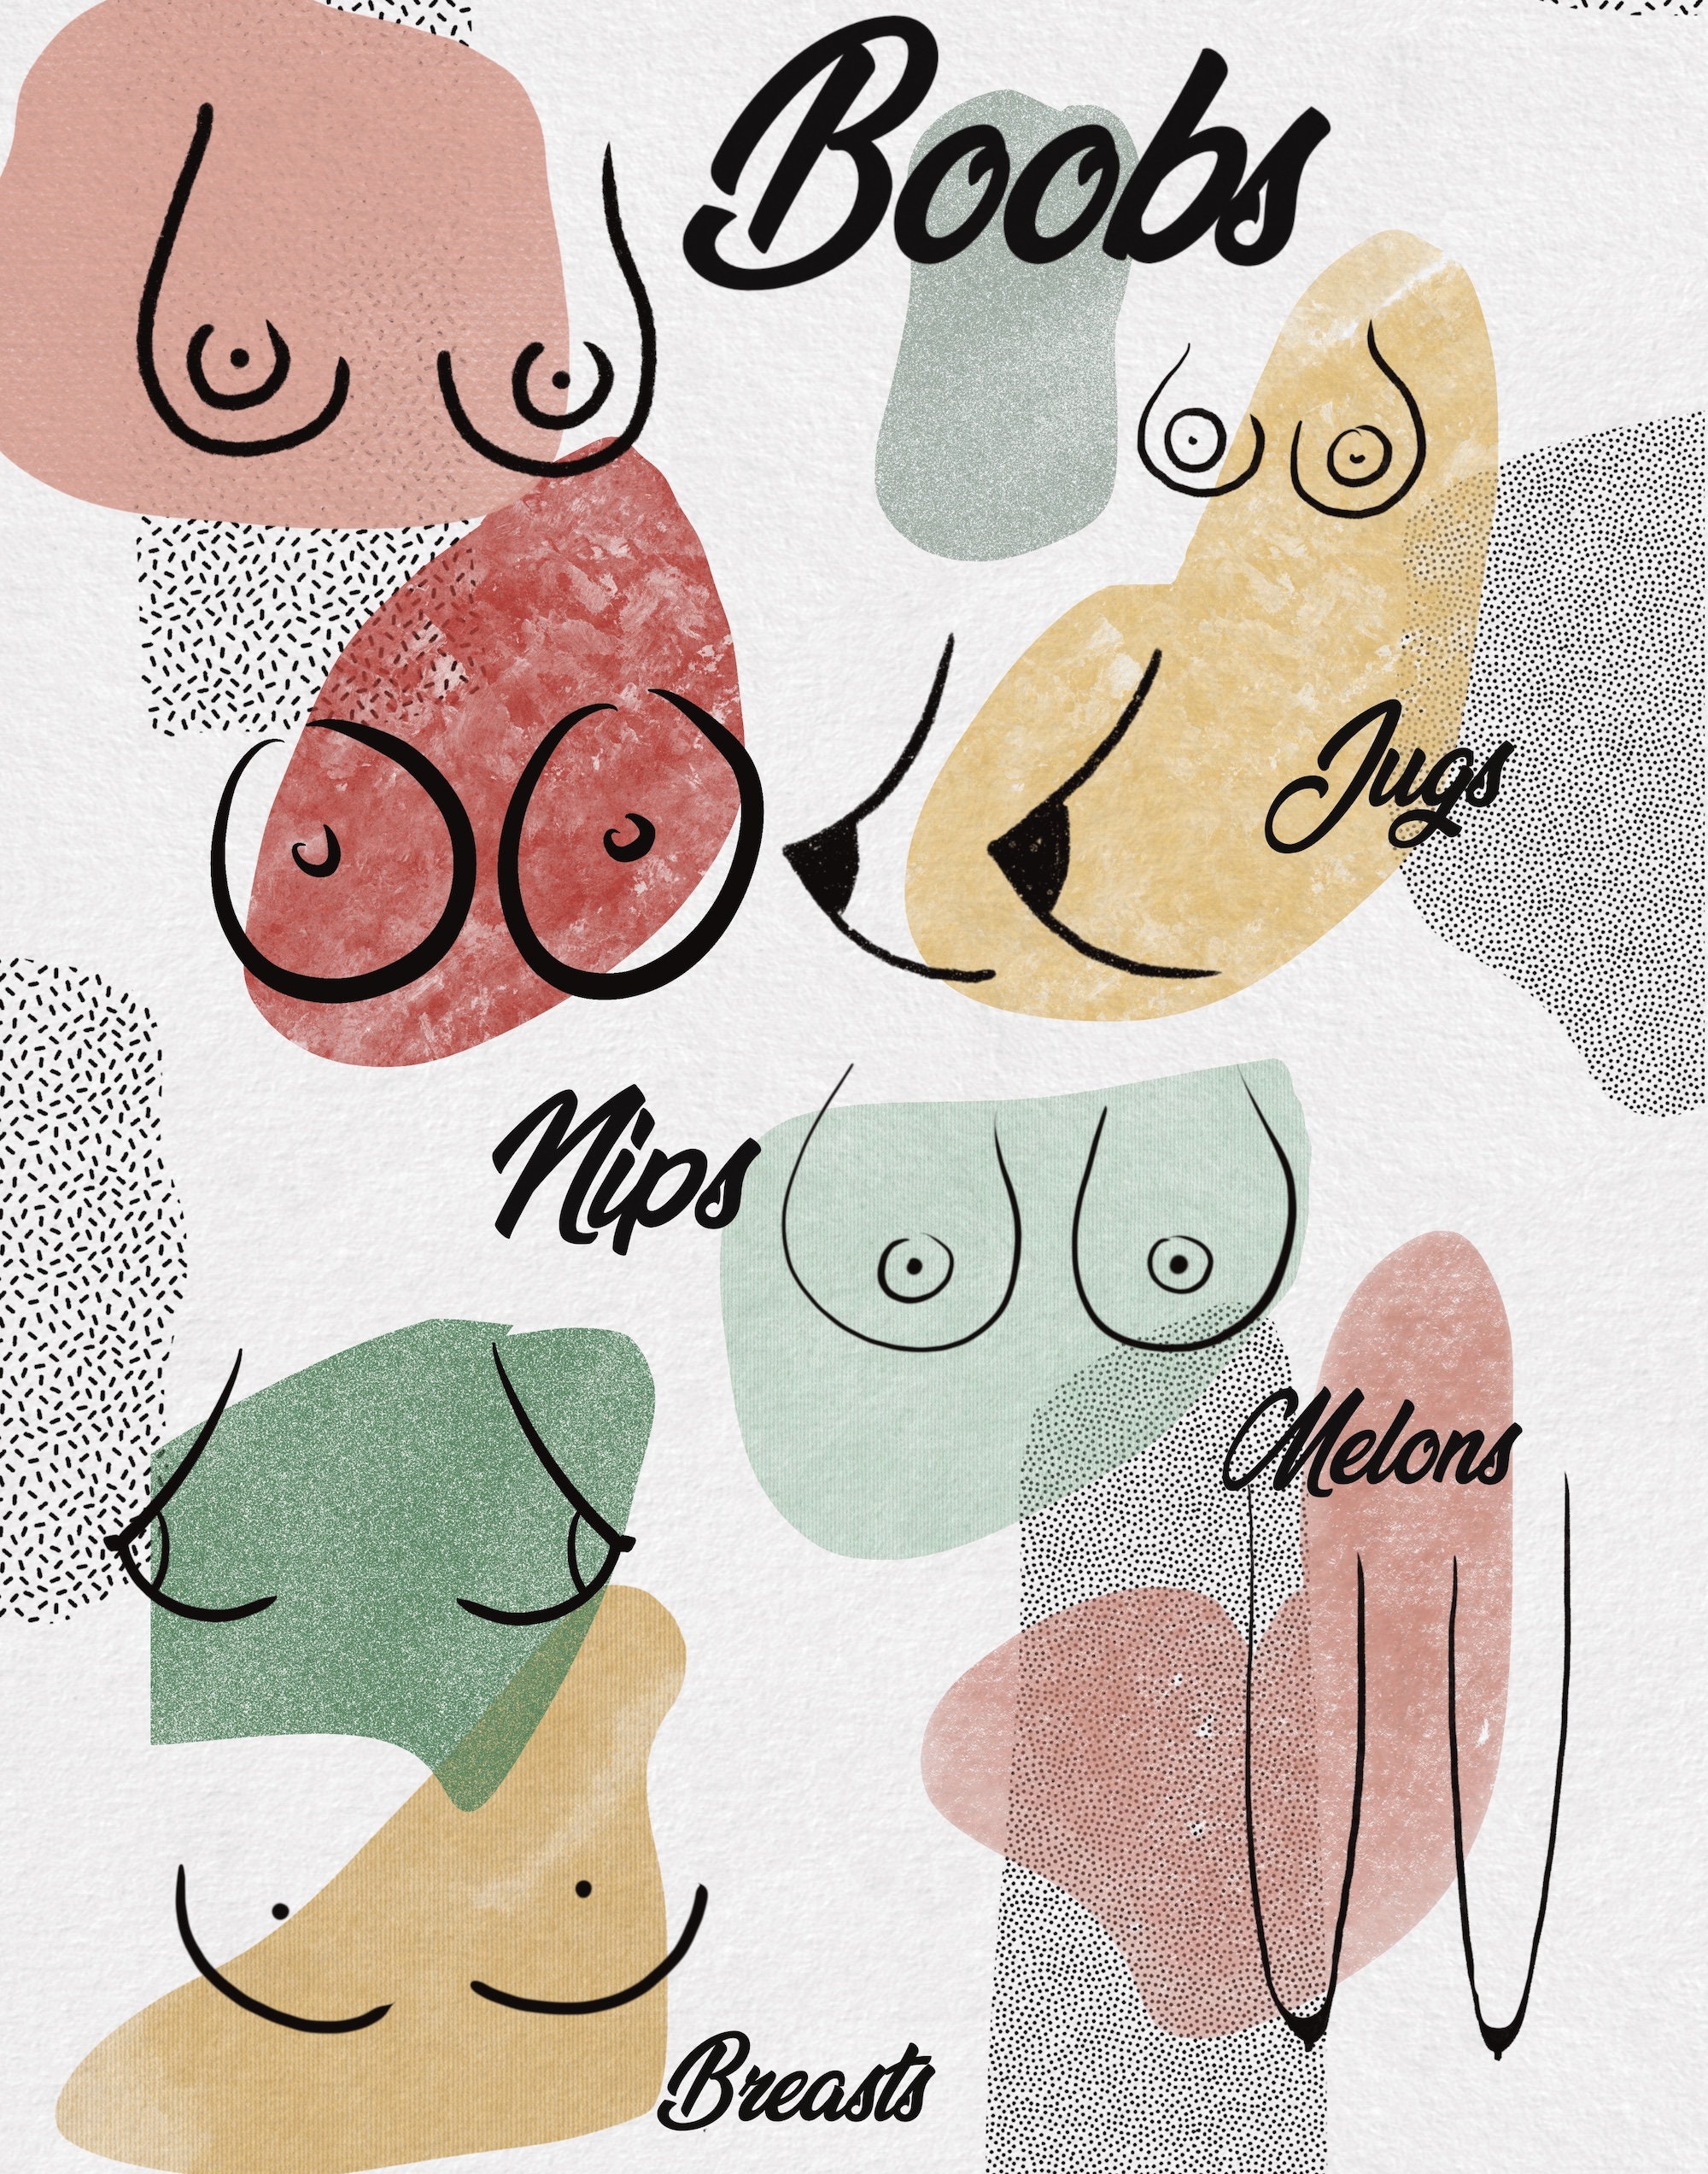 Boobs, Boobs, and More Boobs Female Women LGBTQ Gay Breasts Figure